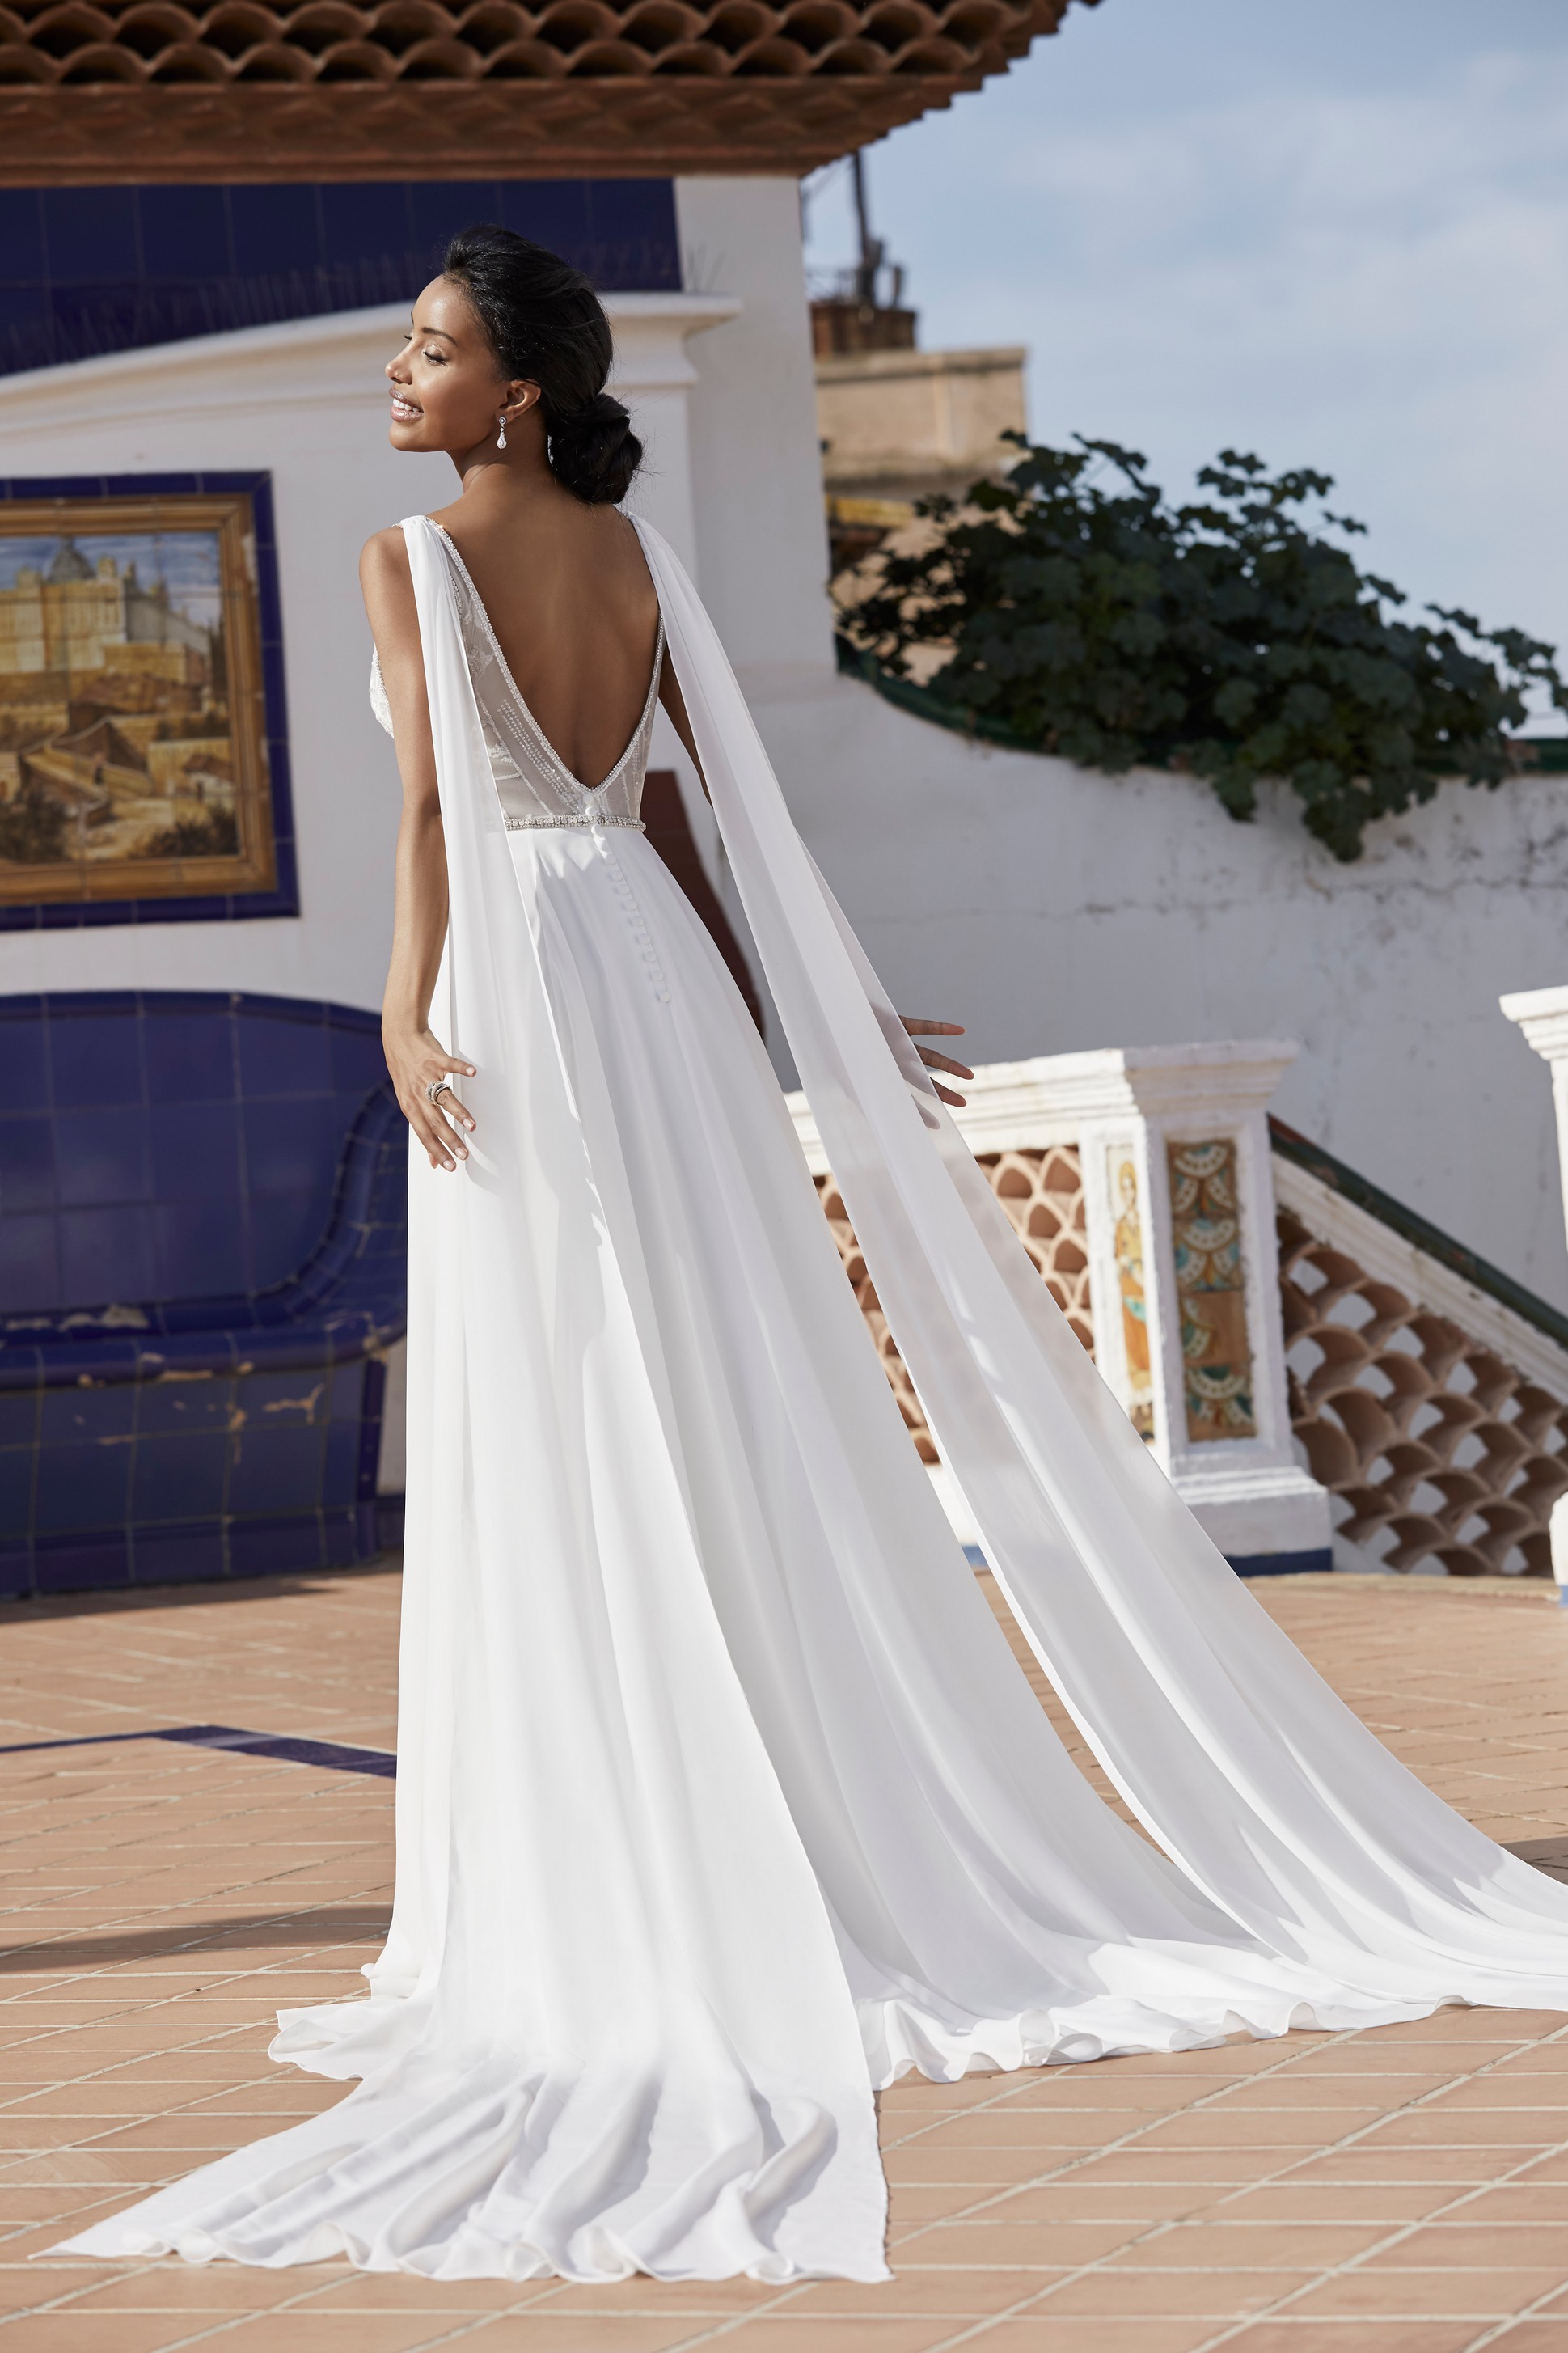 Lady standing outside in the sun on terrace wearing backless wedding dress with drape shoulder detail 